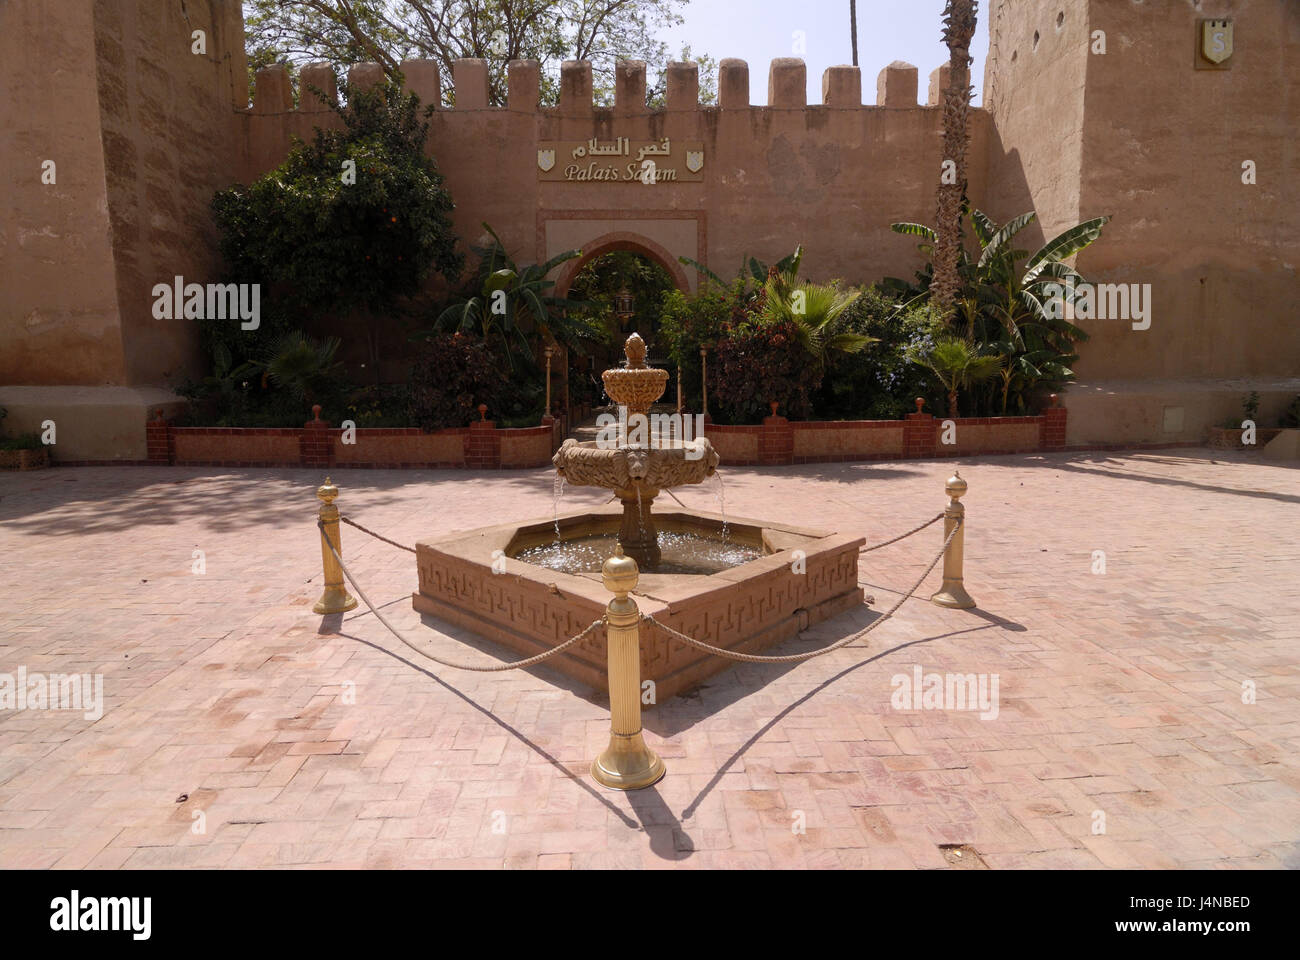 Morocco, Taroudannt, palace Salam hotel, input, well, Africa, building, facade, travel, North Africa, place of interest, tourism, outside wall, fastening, fountain, castle, input range, hotel, hotel building, defensive wall, palace hotel, travel, city wall, Taroudant, accomodation, outside, Stock Photo